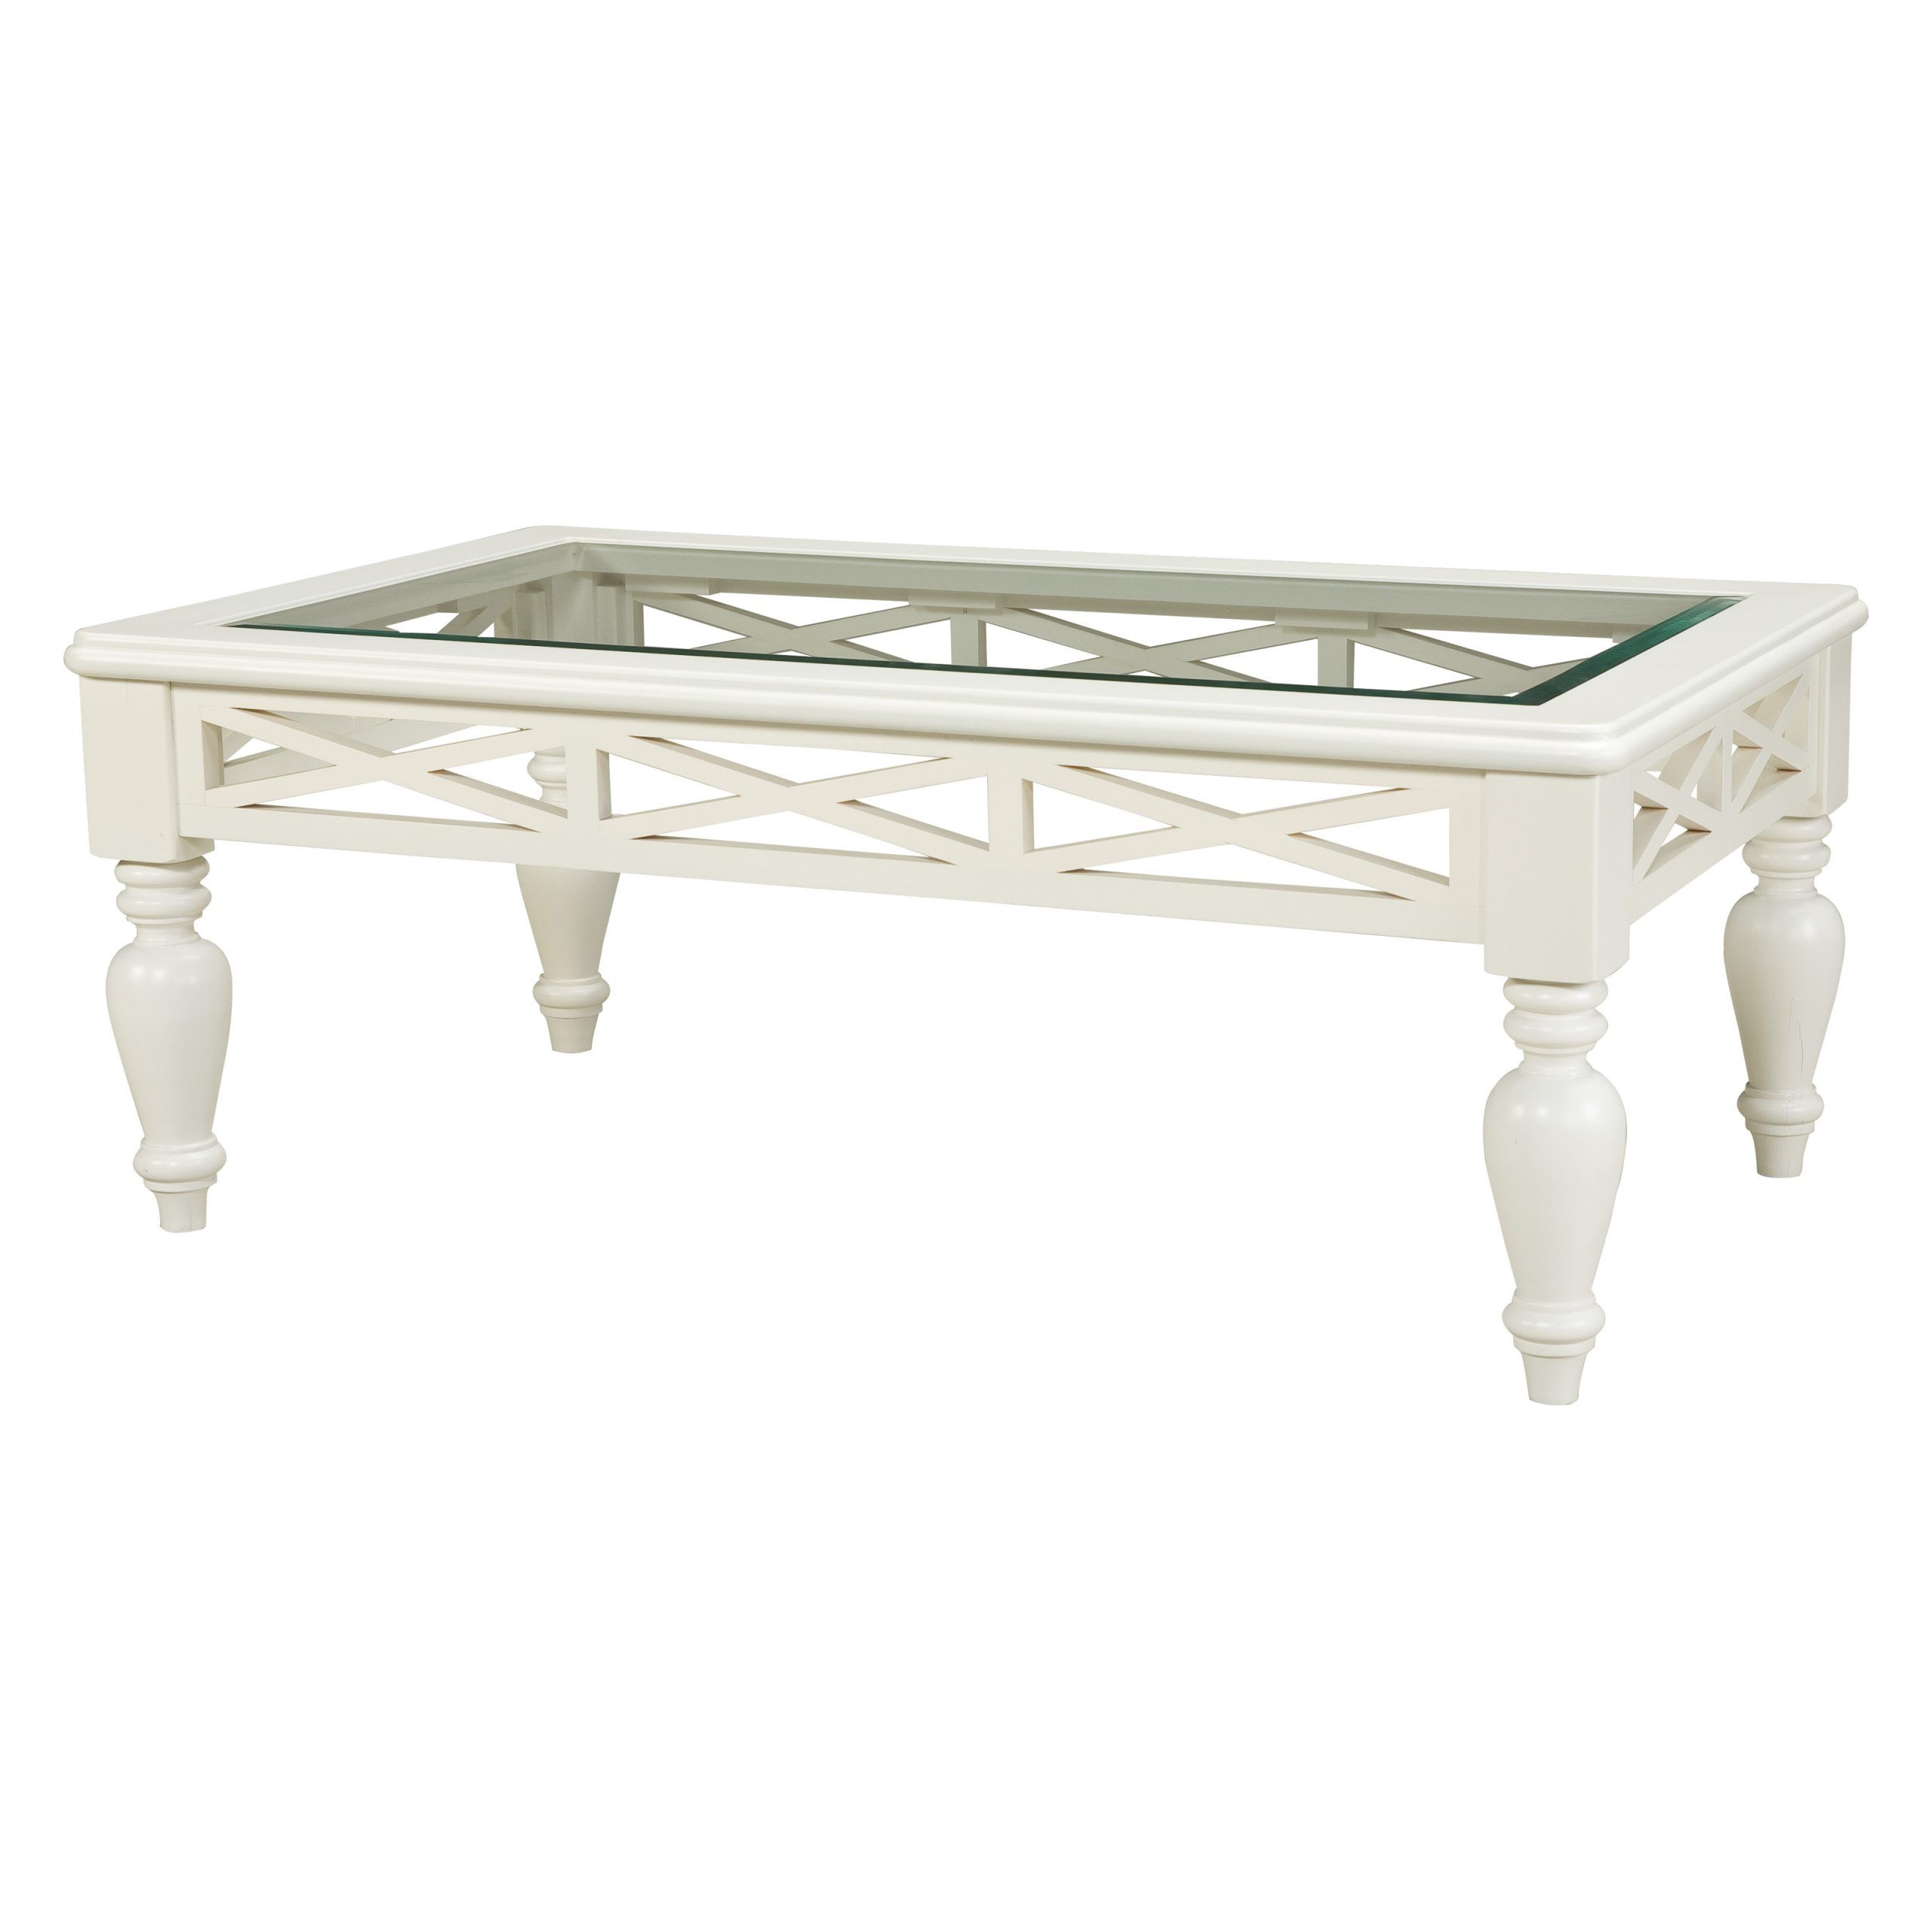 Standard Furniture Cambria Rectangular White Wood And In Preferred Espresso Wood And Glass Top Coffee Tables (View 15 of 20)